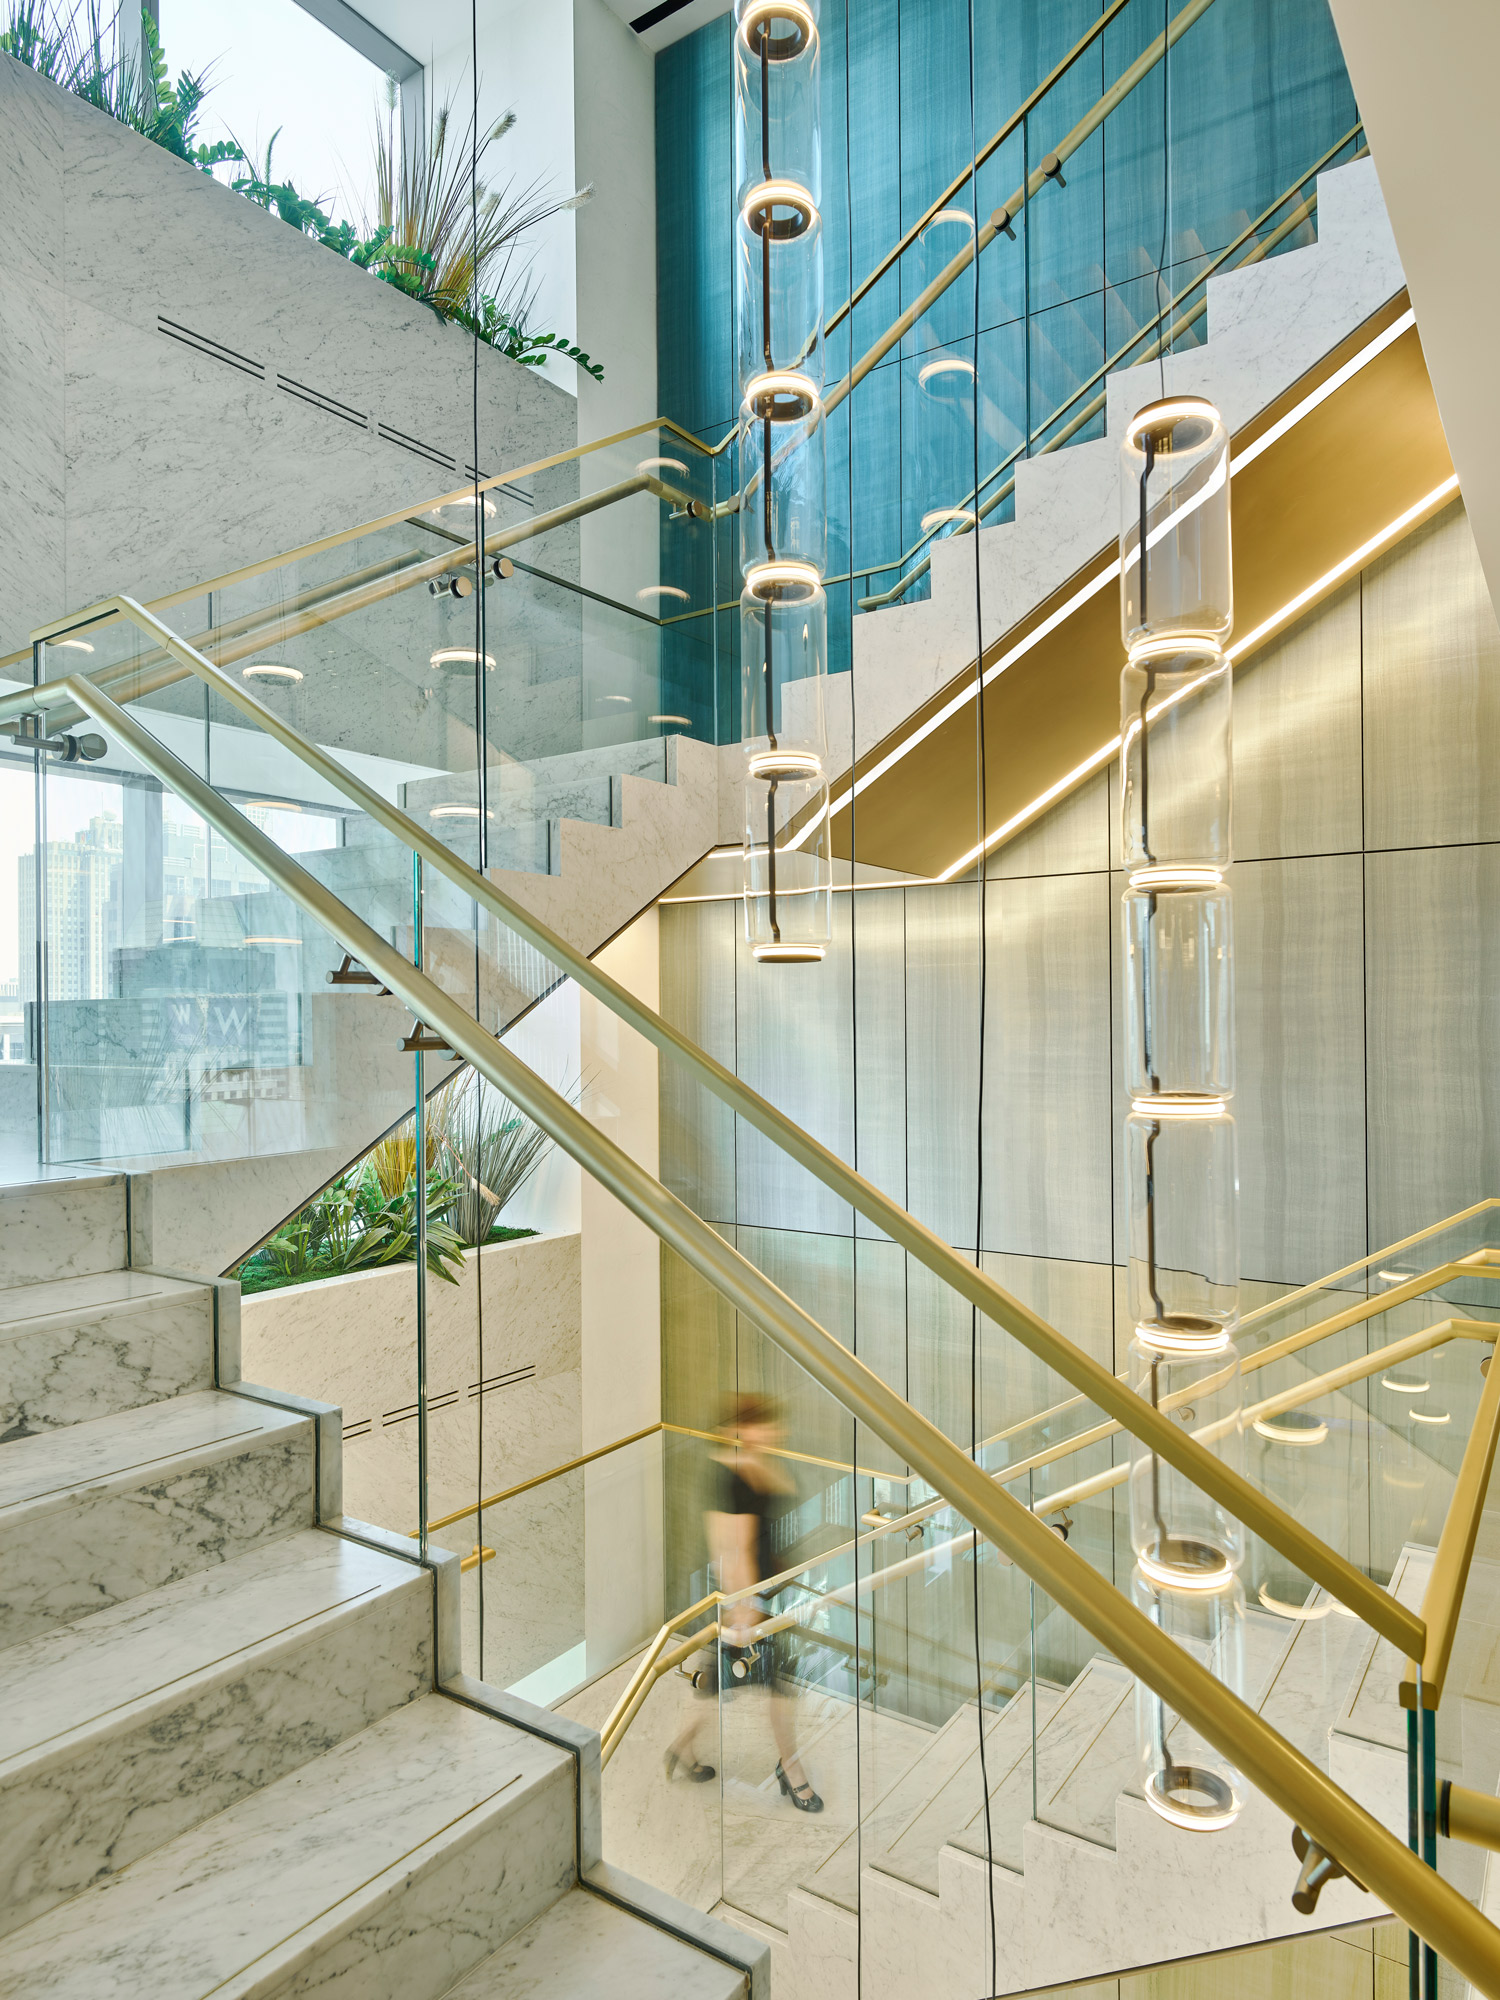 A modern staircase in a corporate building with vertical light fixtures, glass balustrades, and a person descending.